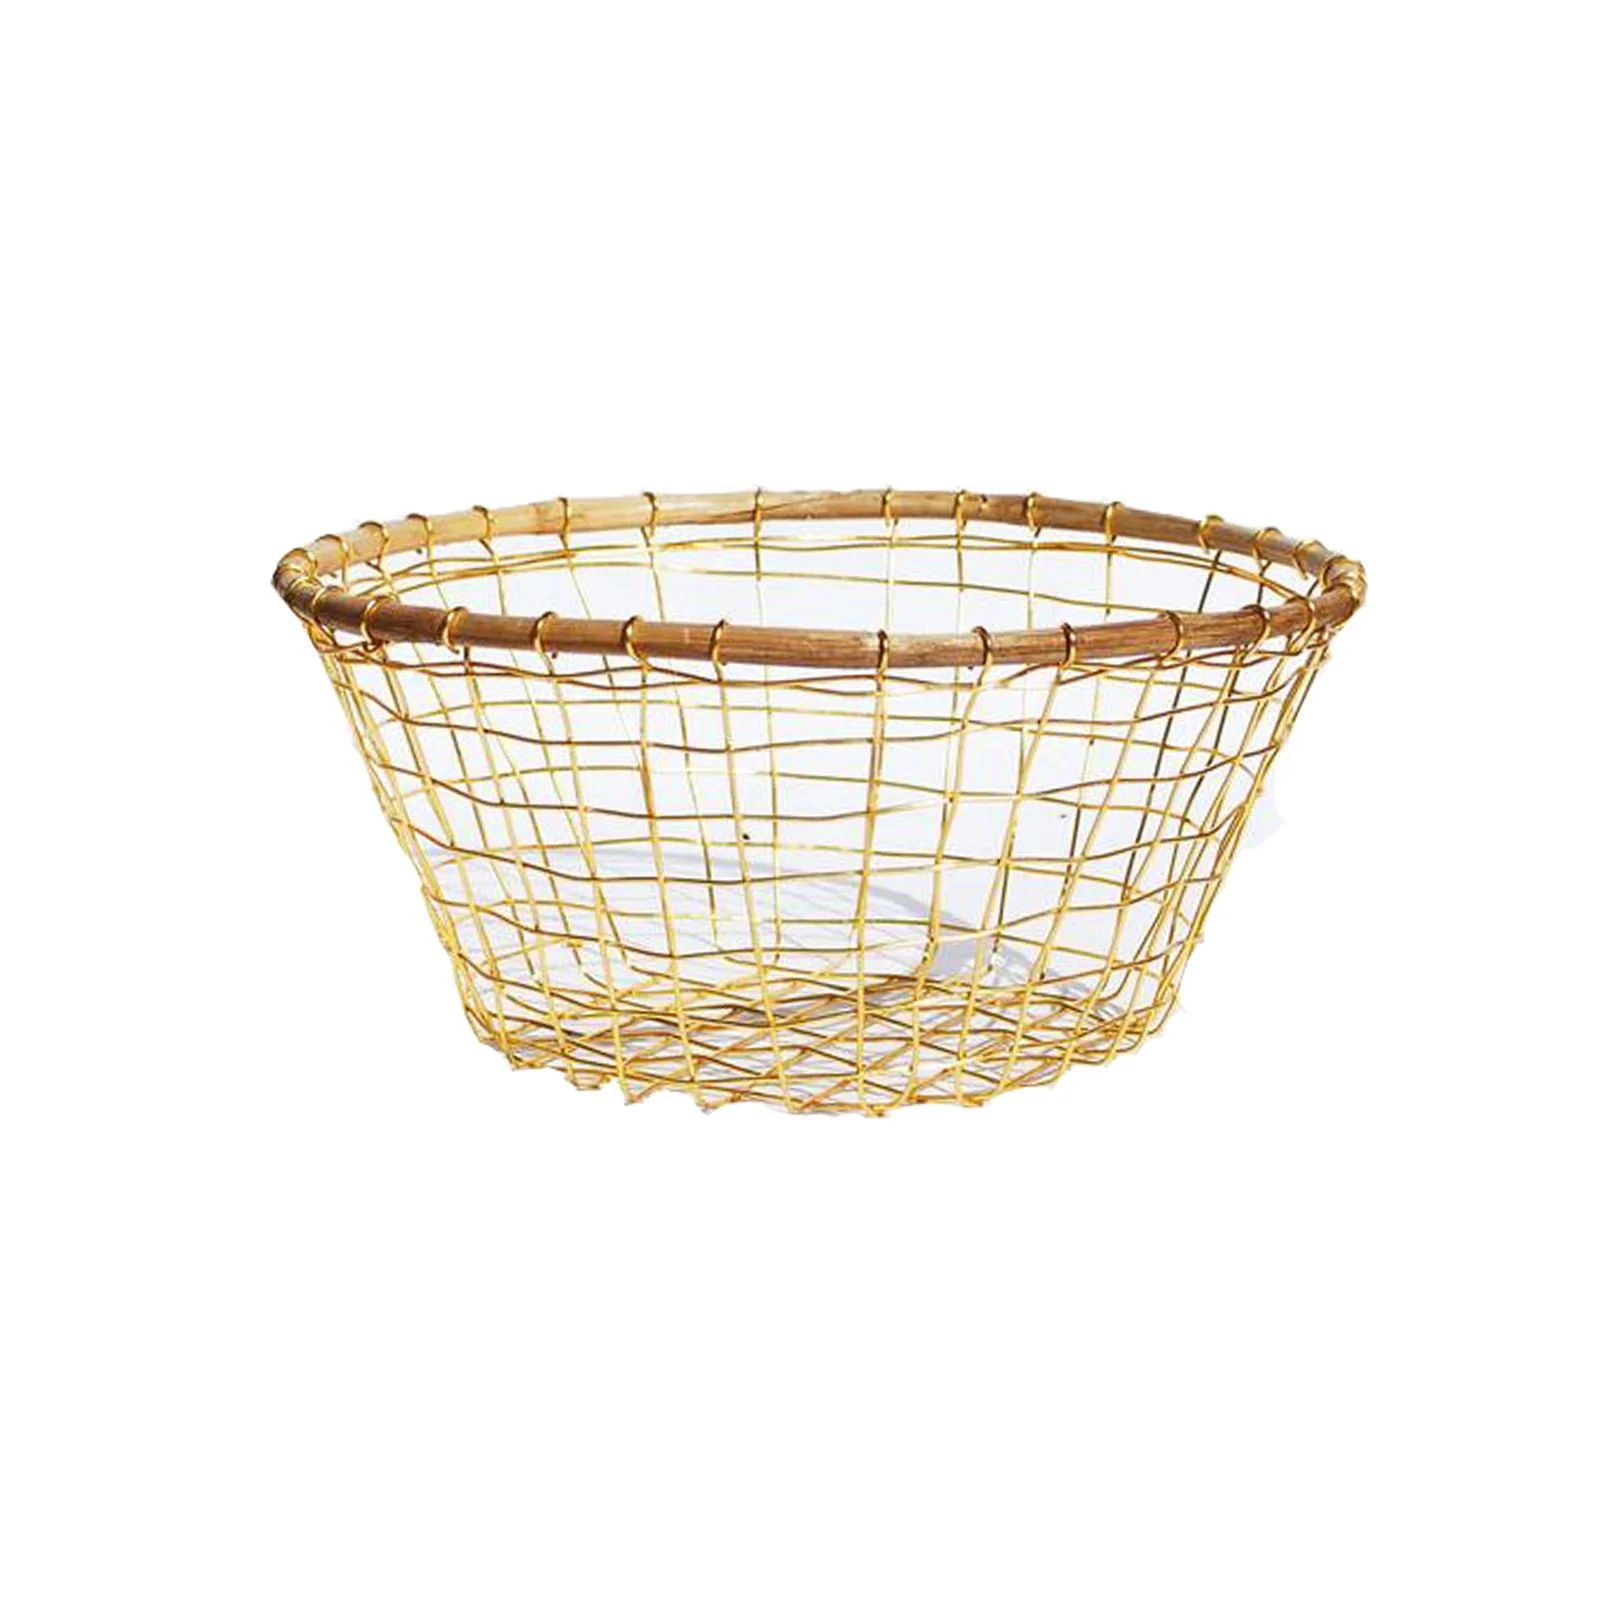 Brass and Cane Vegetable Basket | Brooke and Lou